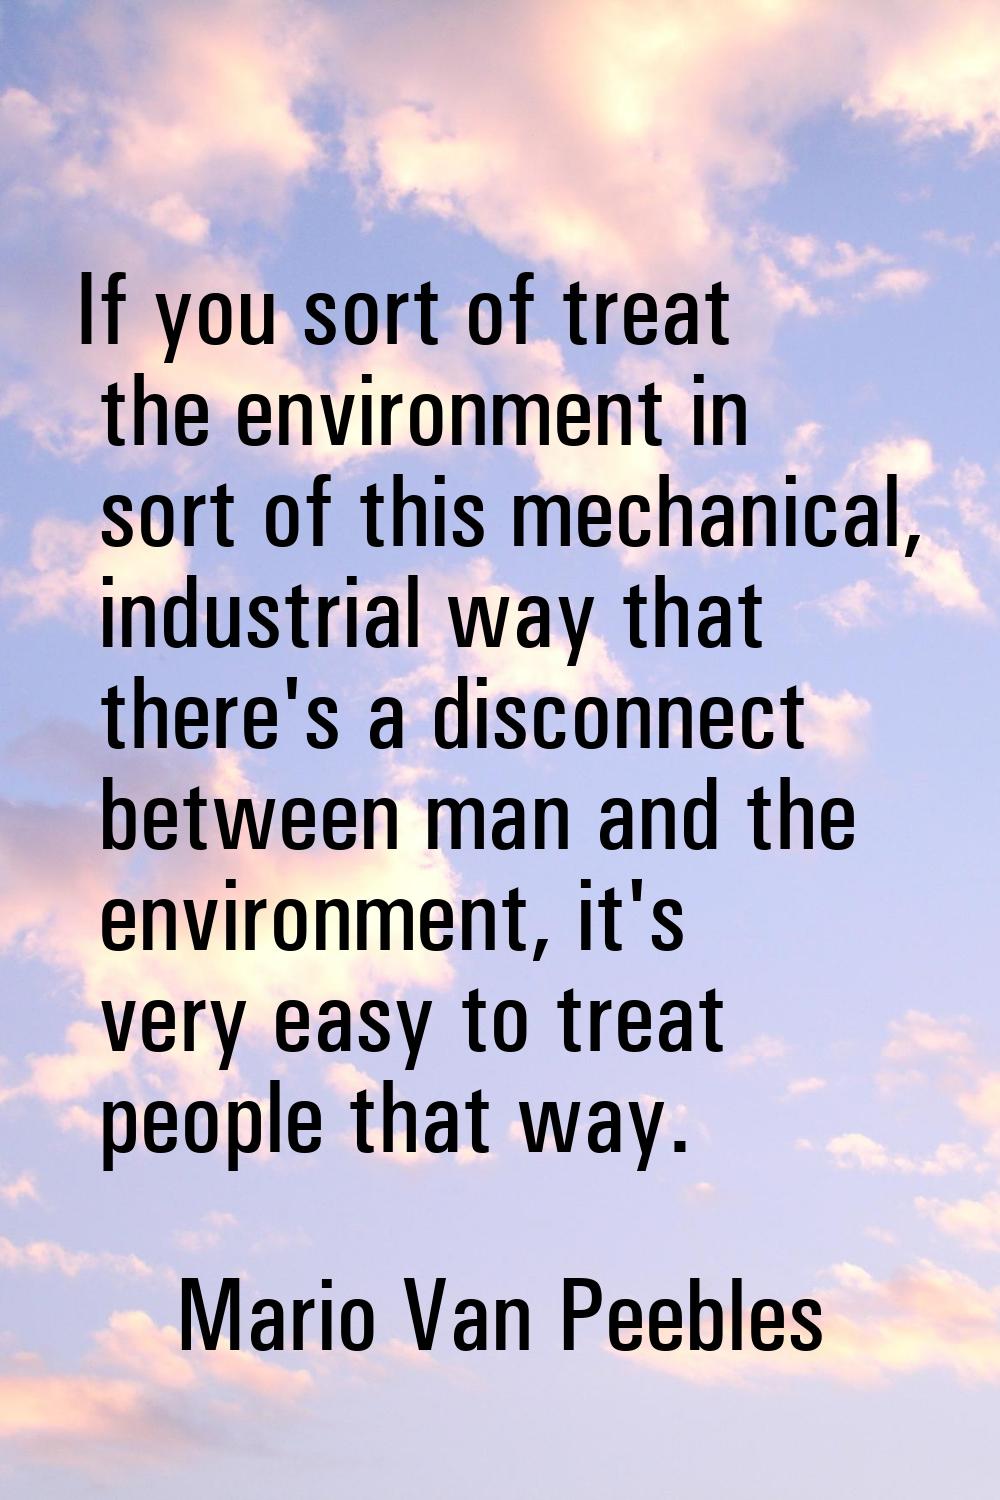 If you sort of treat the environment in sort of this mechanical, industrial way that there's a disc